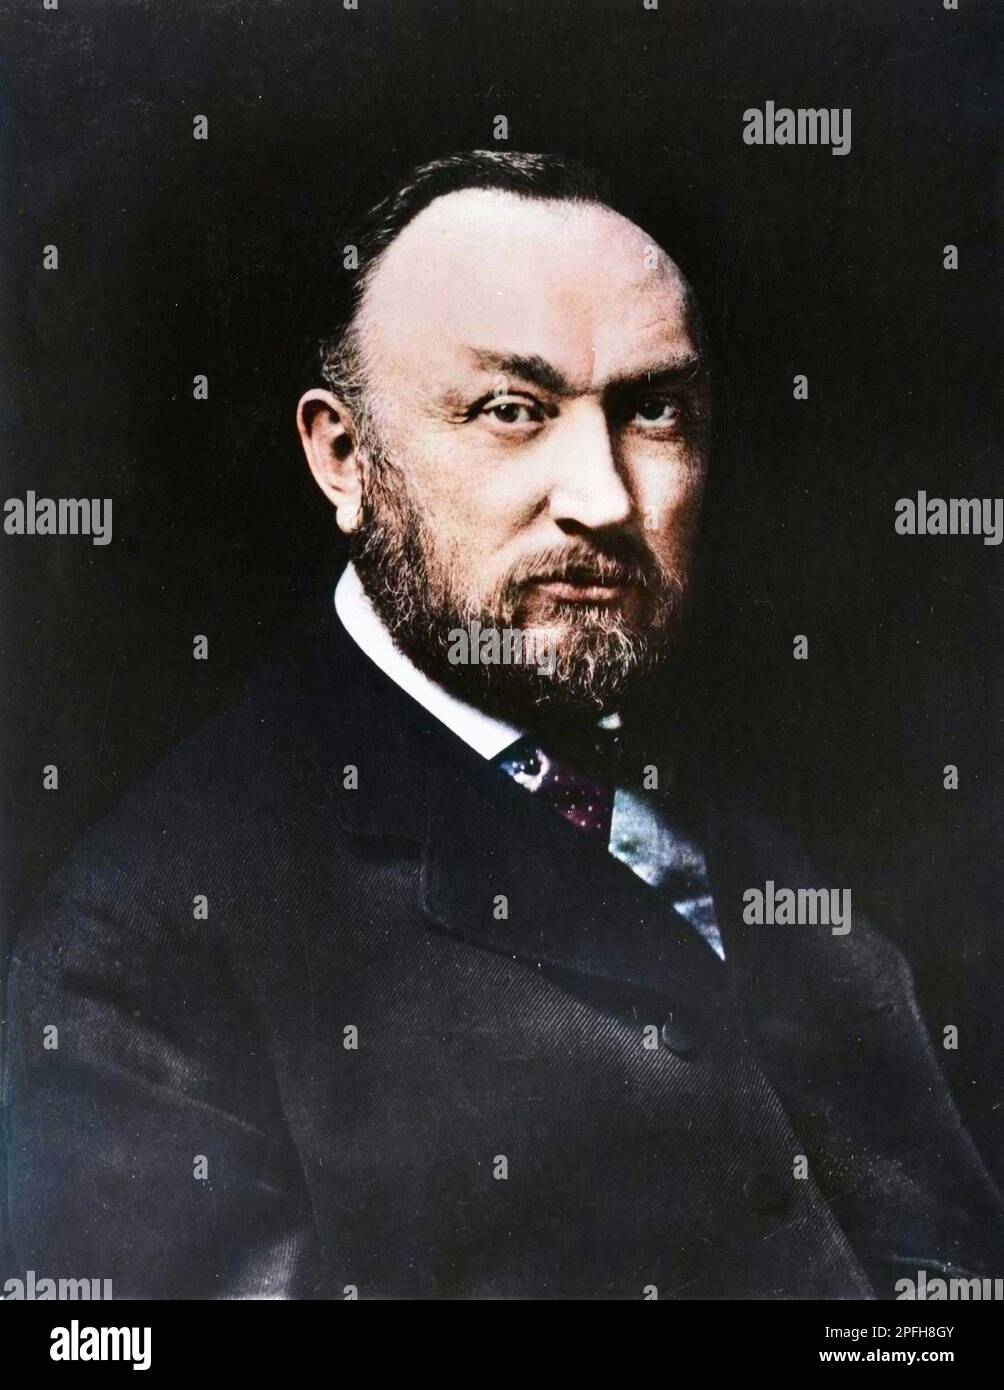 Edward Charles Pickering - American astronomer (1846-1919) - American astronomer and physicist Stock Photo